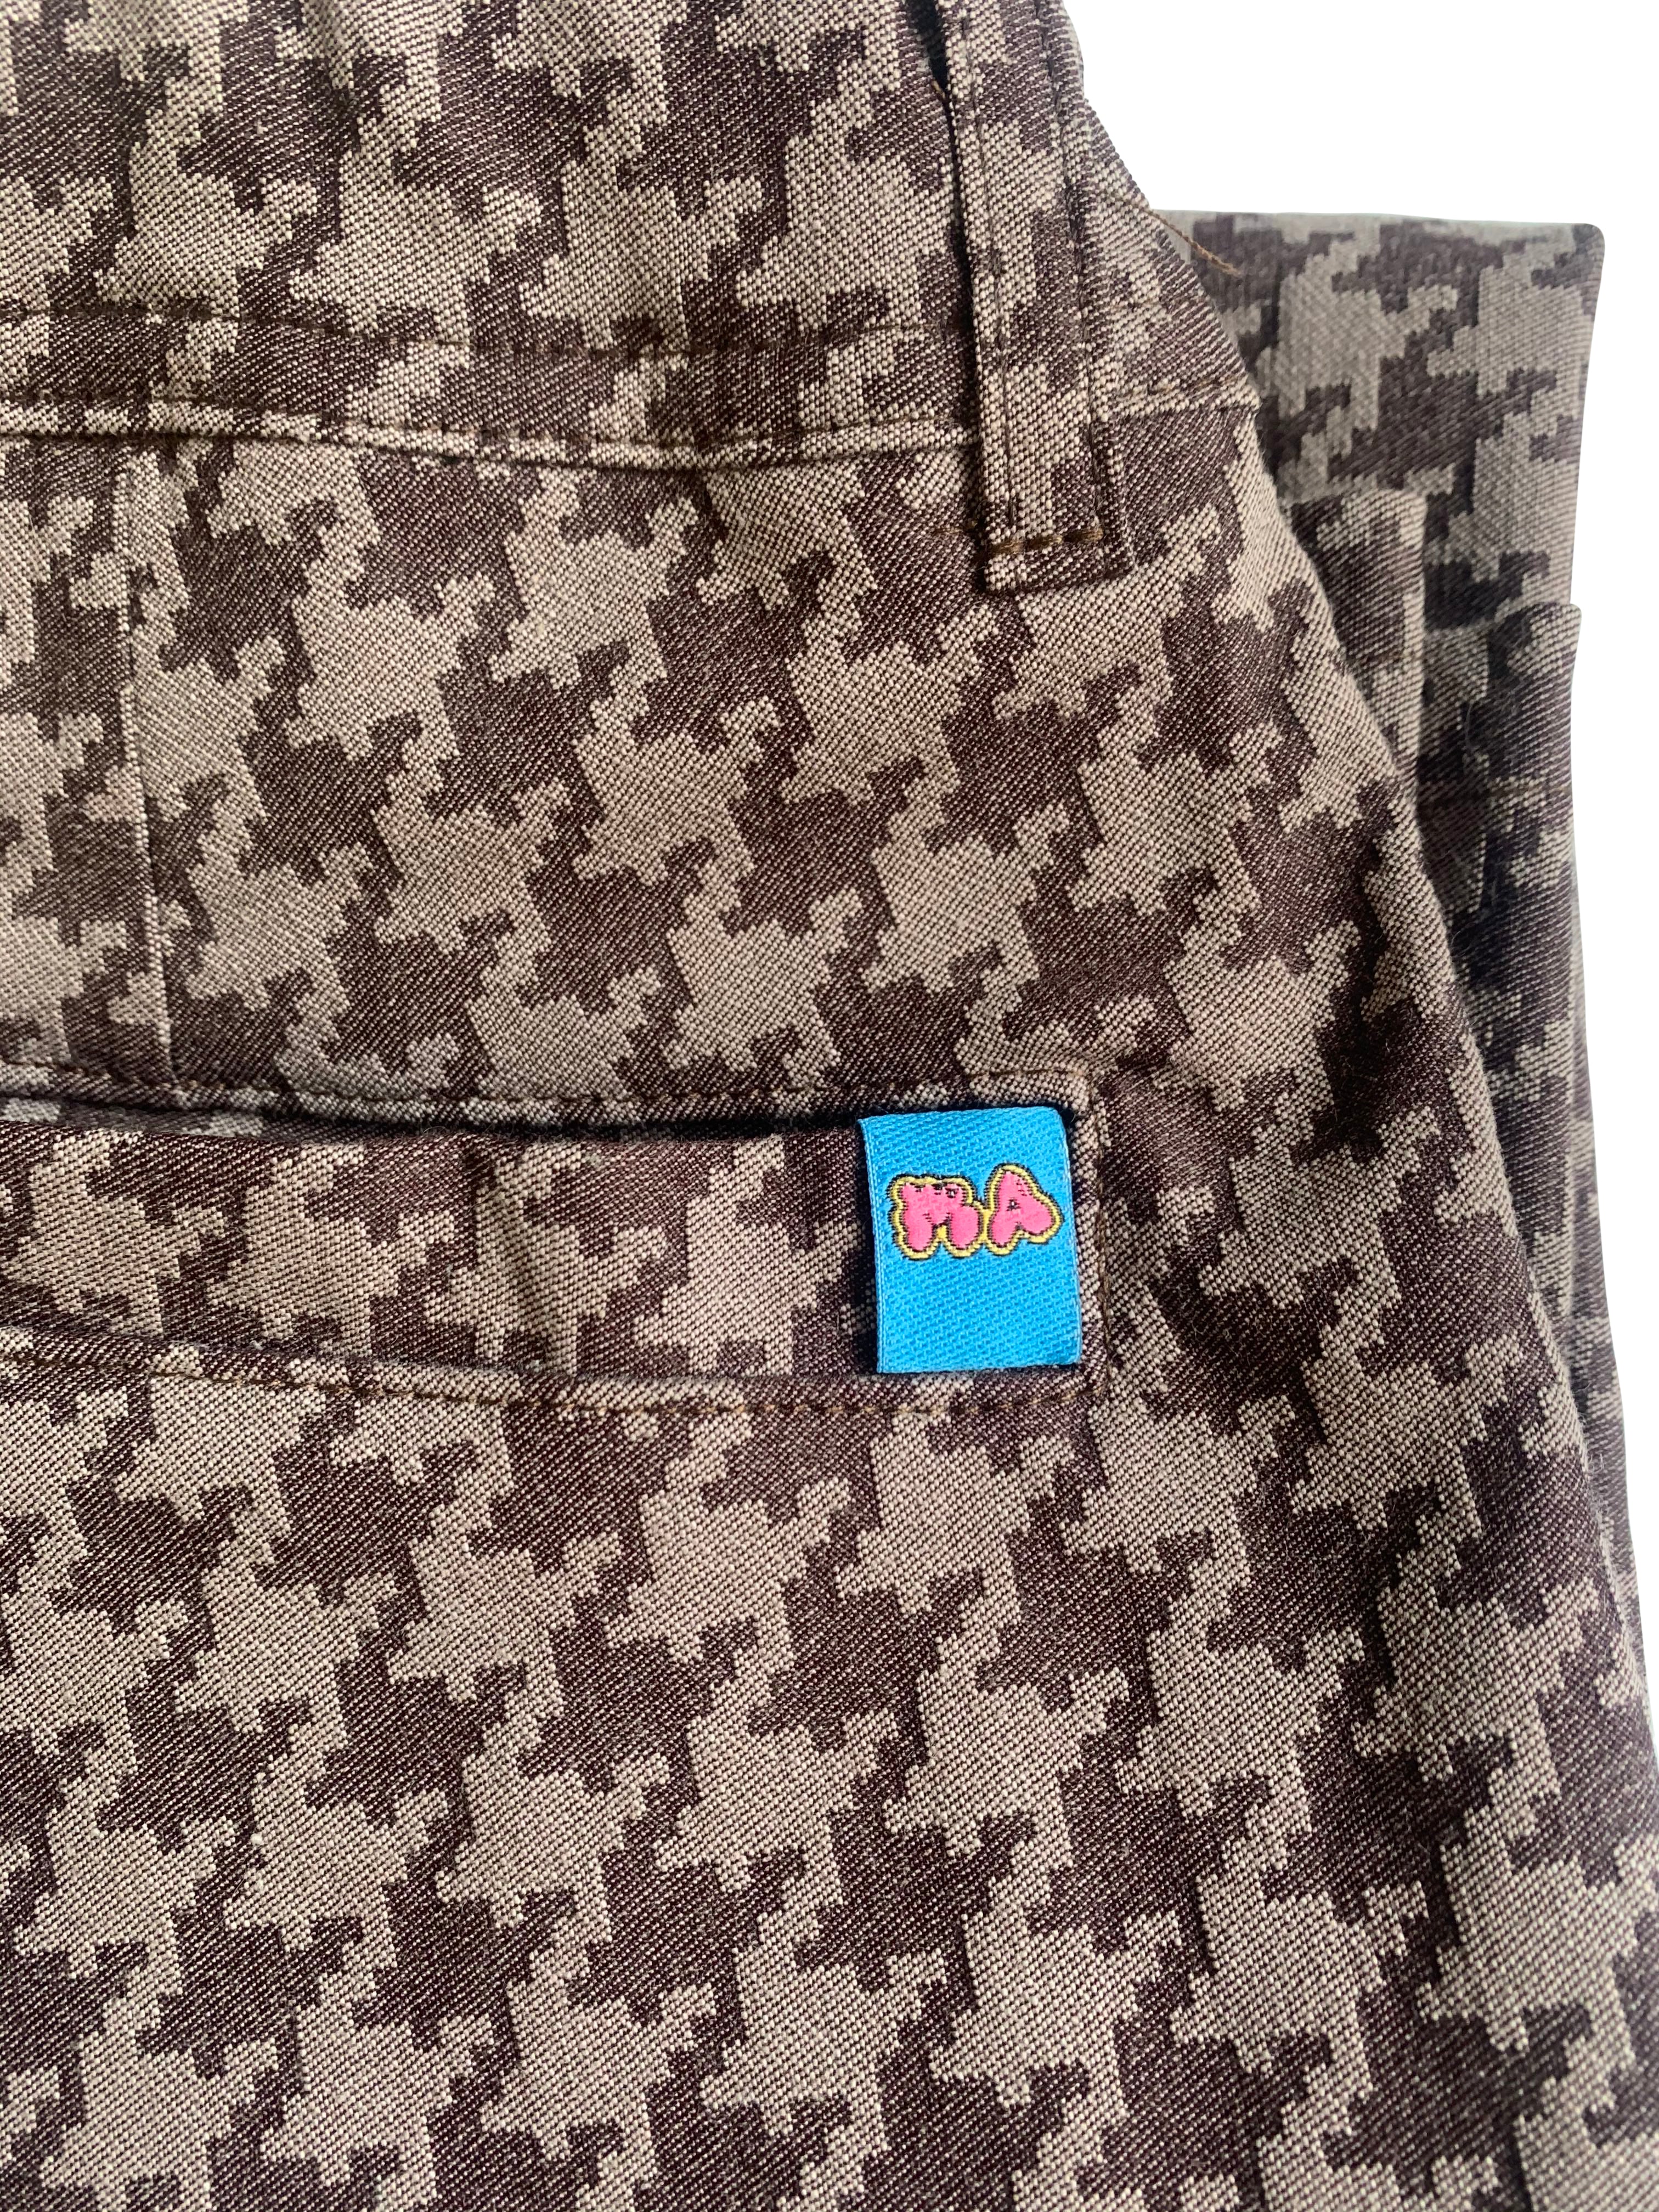 Houndstooth pant (short inseam)